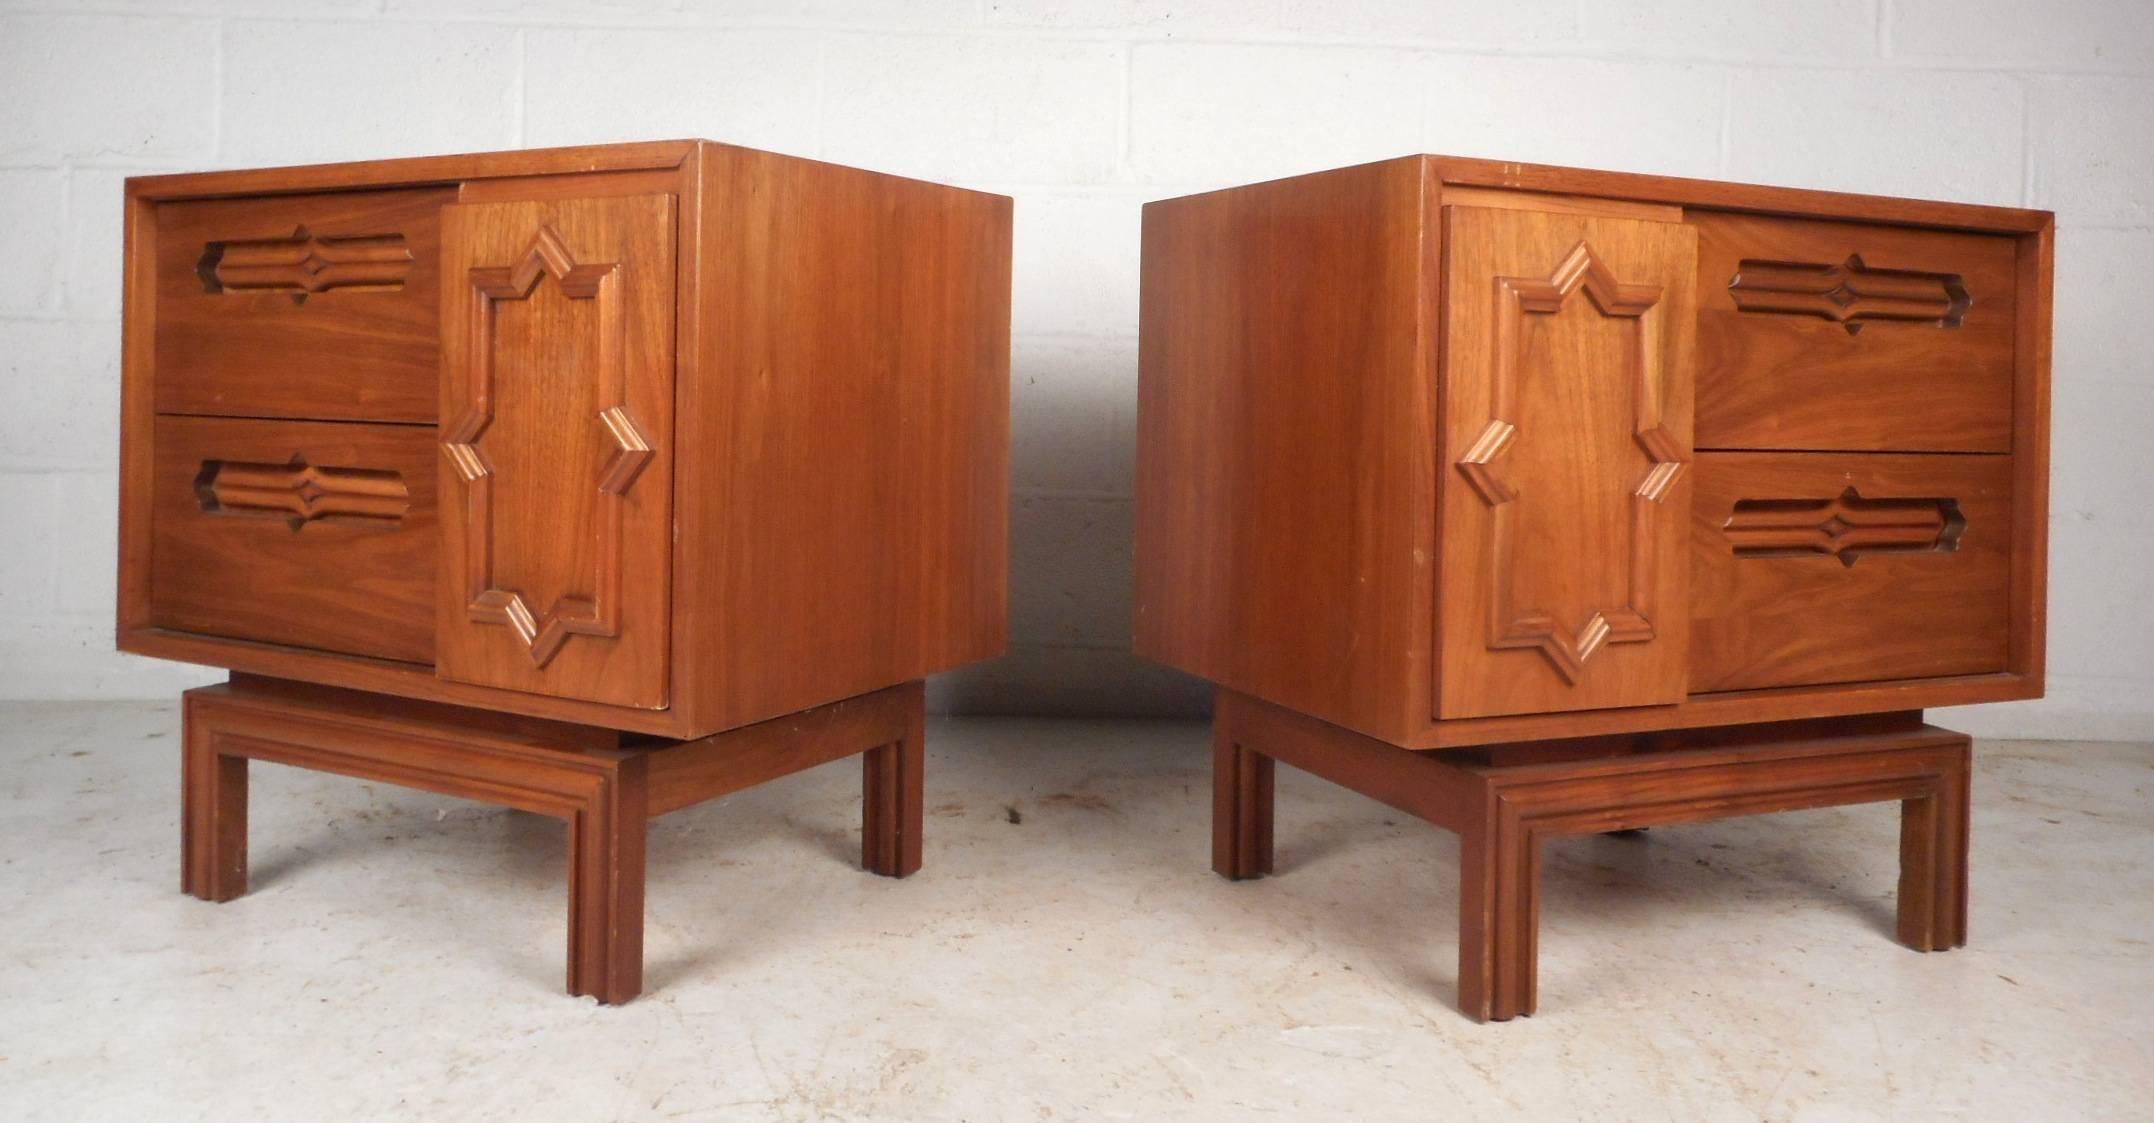 This stunning pair of vintage modern nightstands feature a unique front with carved designs and pulls. Unusual design with two drawers and a sliding door with a hidden compartment behind it. This one of a kind pair have a stylish base with etched